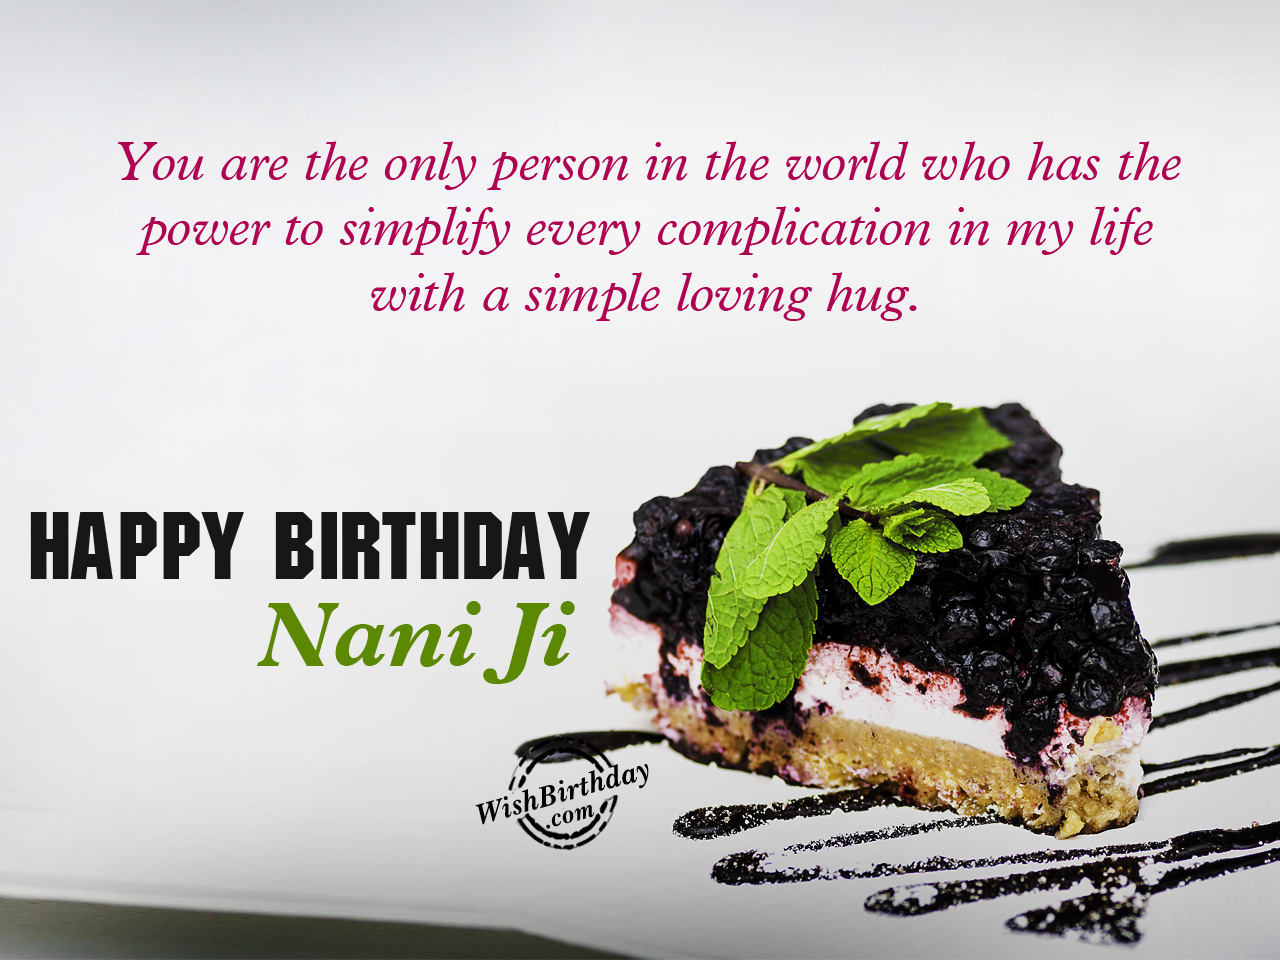 You are the only person in the world, Happy Birthday Nani Ji ...